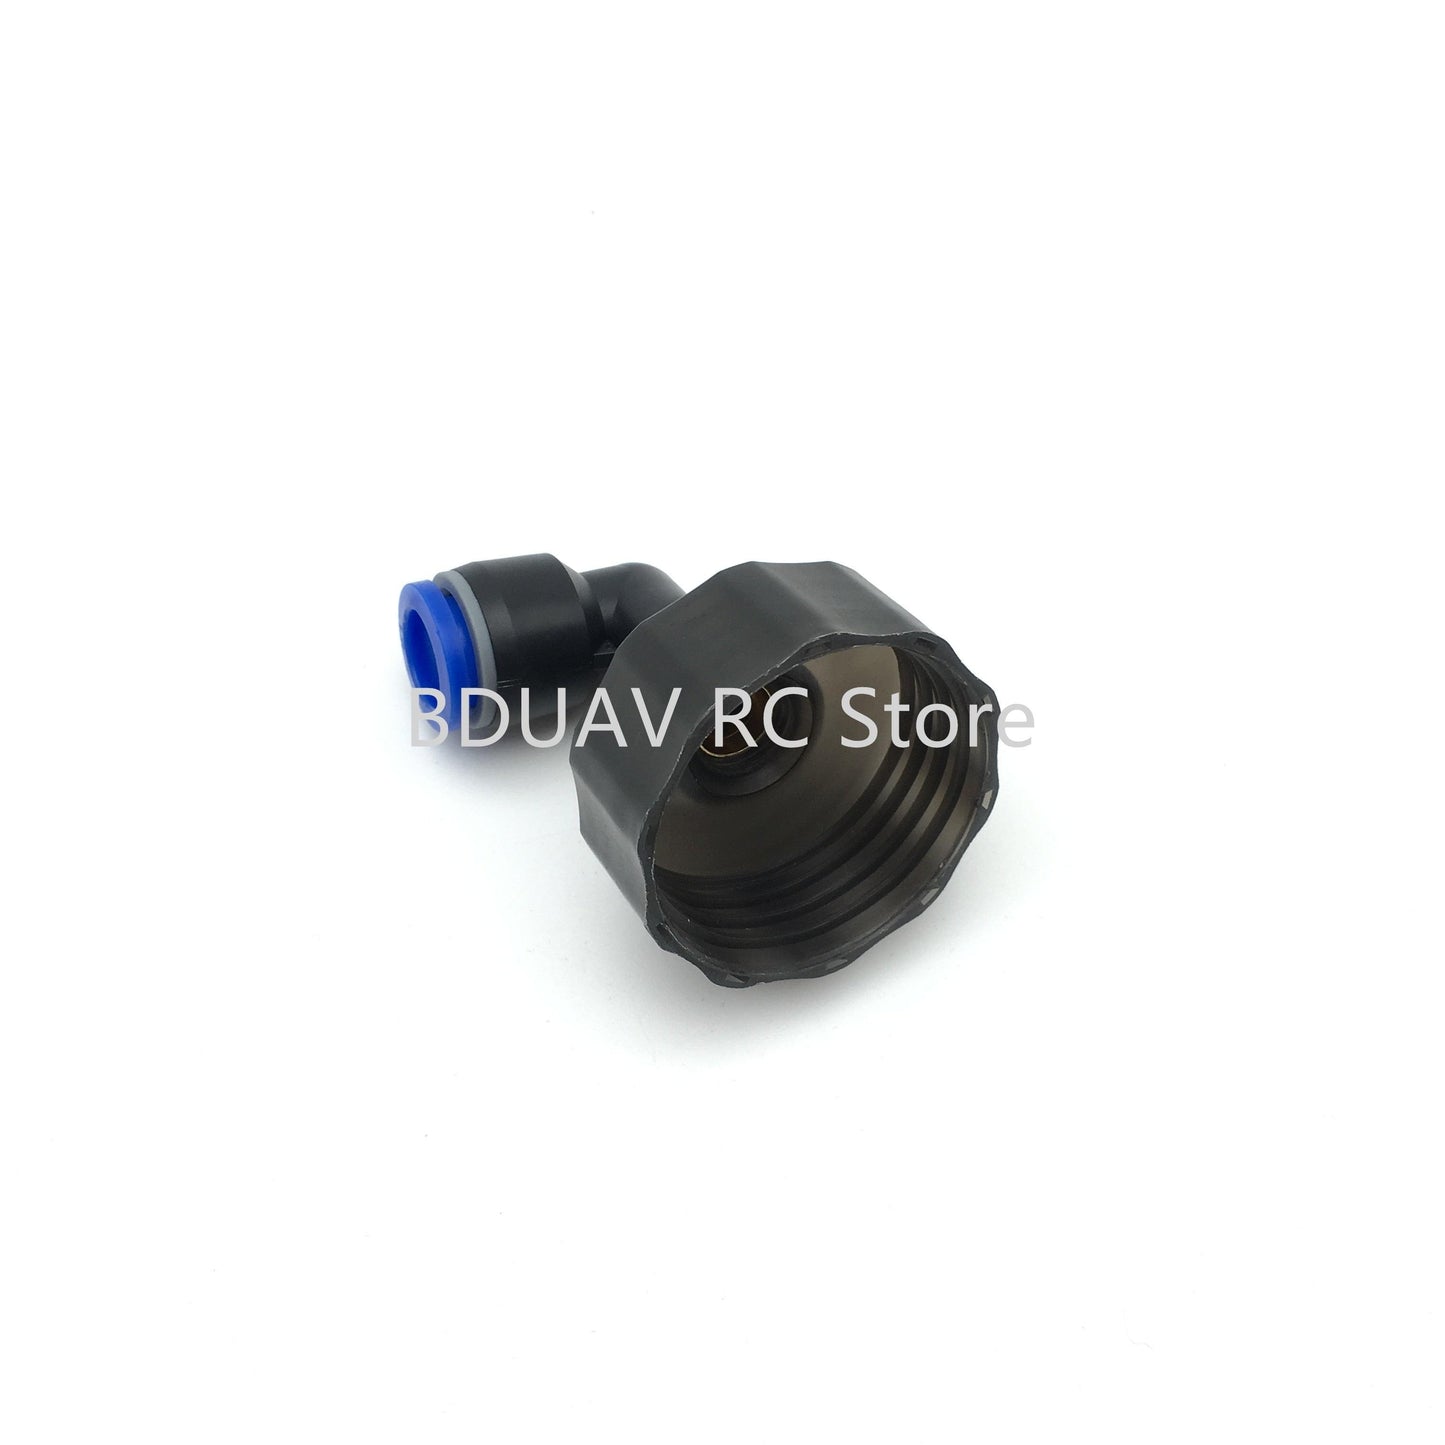 10L 16kg water tank pneumatic cover - 8mm 10mm 12mm water diameter medicine box pneumatic Connector agricultural spray drone UAV - RCDrone